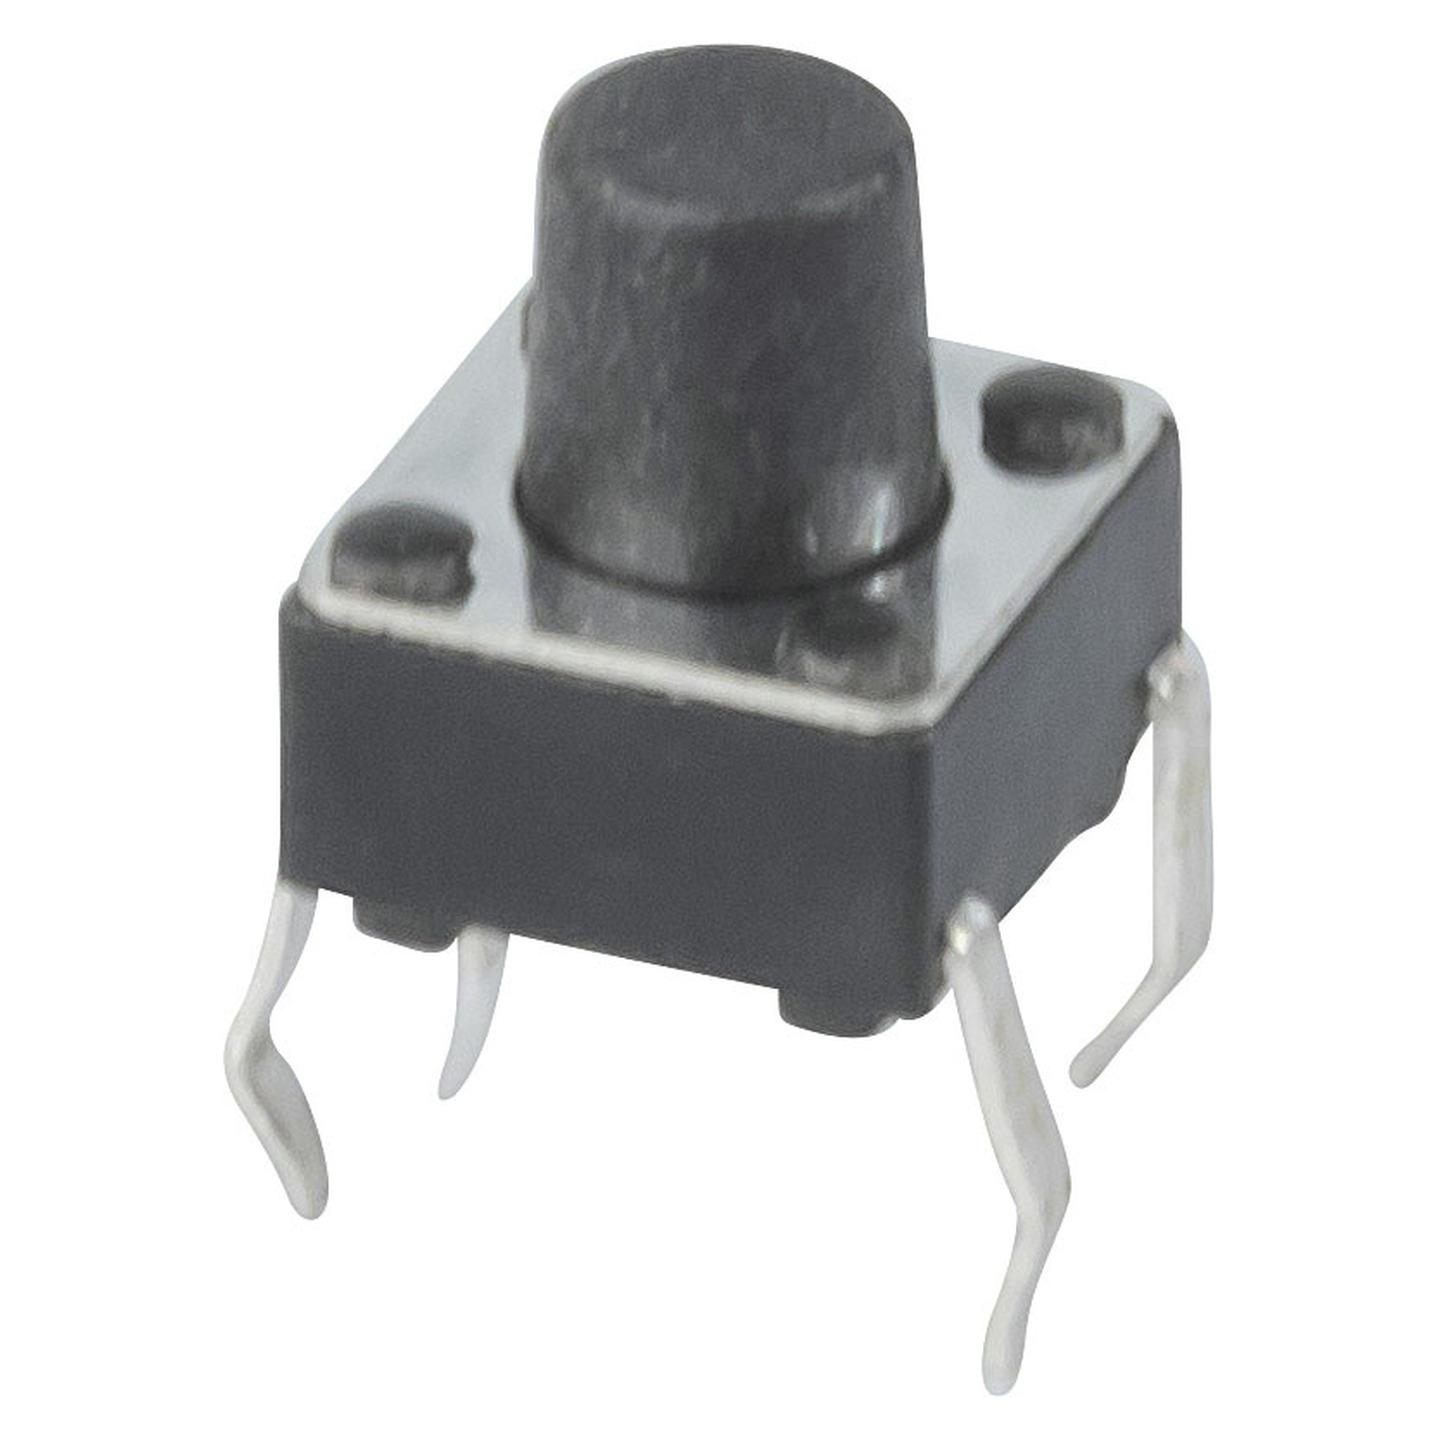 3.5mm SPST Micro Tactile Switch